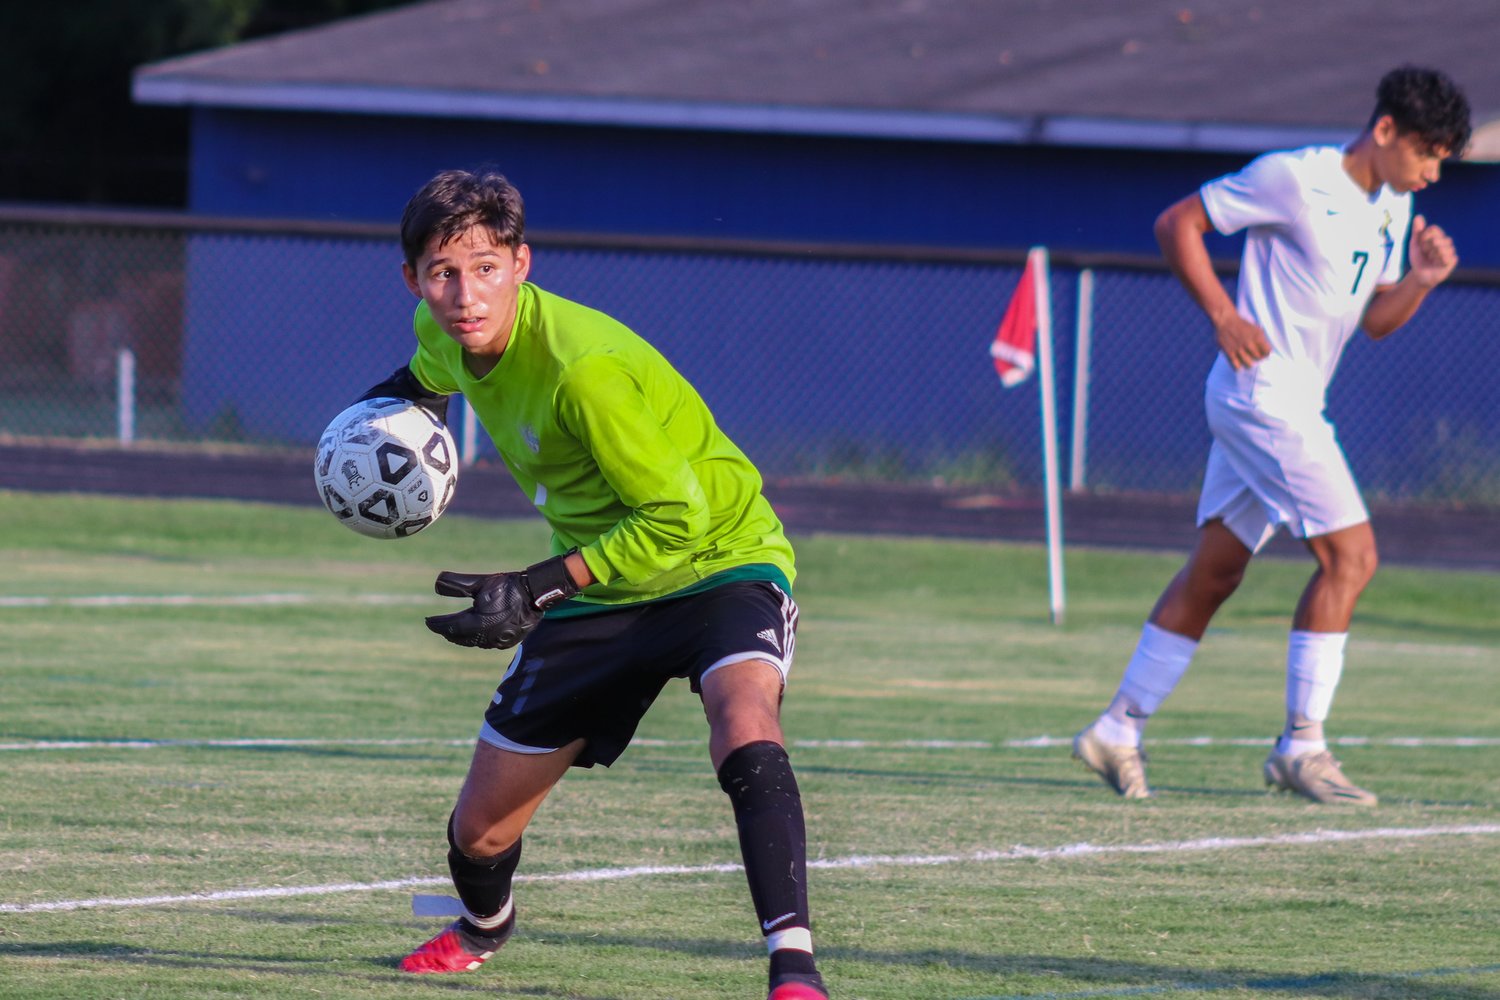 Jordan-Matthews goalkeeper Ricardo Rocha (with ball) prepares to roll the ball to his teammate after making a save in the Jets' 4-1 season-opening win over the Chargers last Thursday in Siler City.